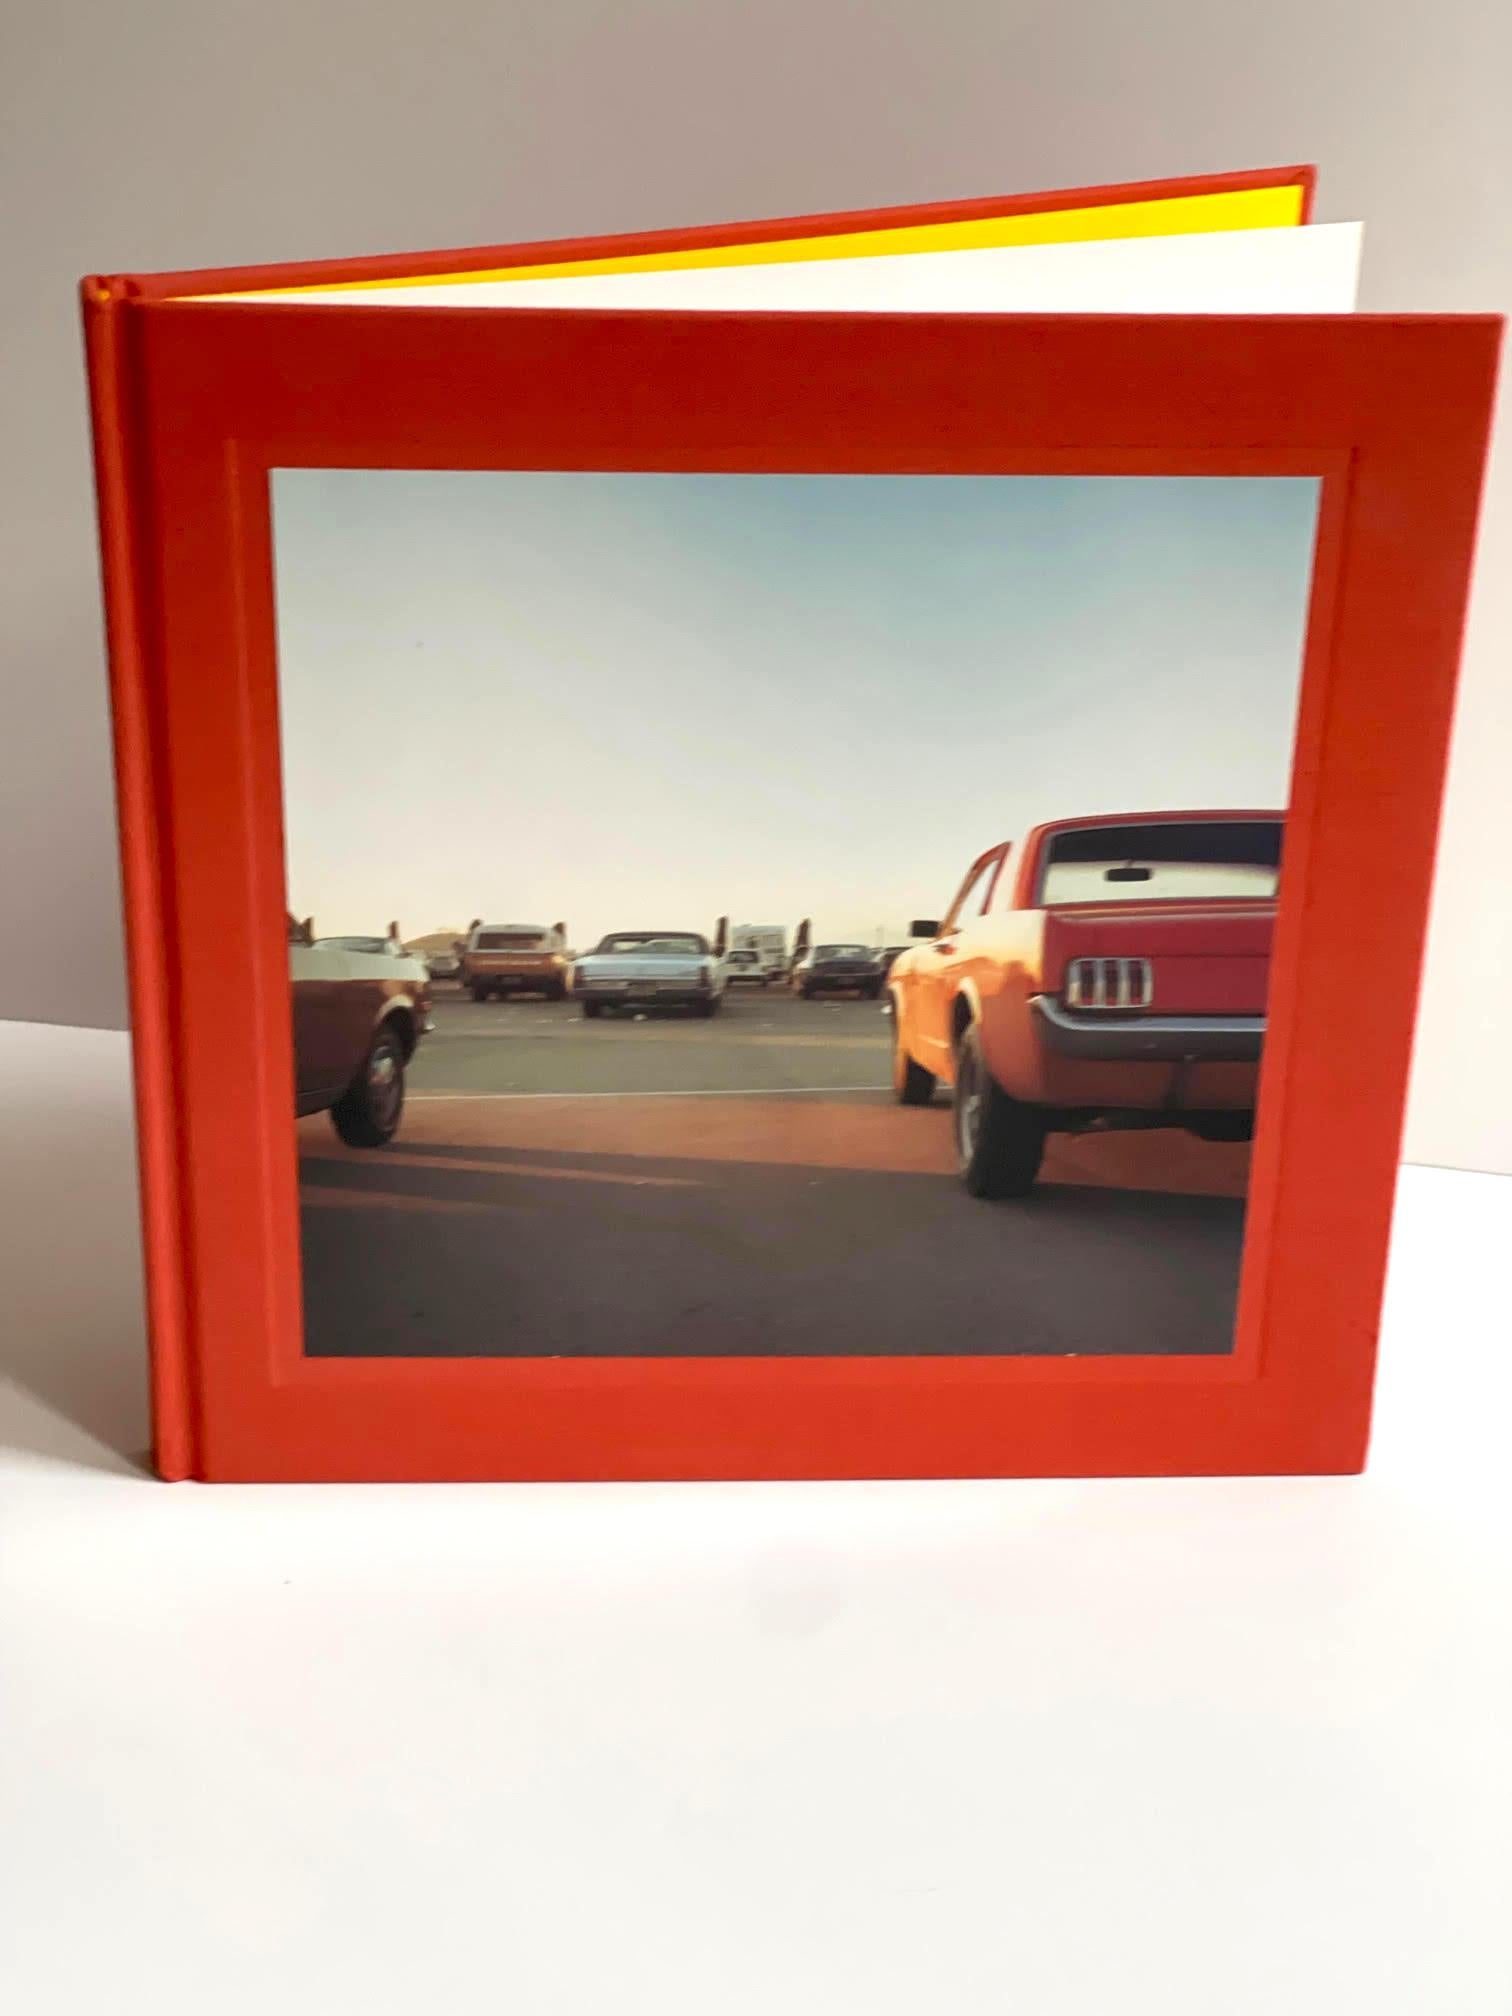 2 1/4 Eggleston (Limited Edition Monograph Hand signed by William Eggleston) For Sale 5